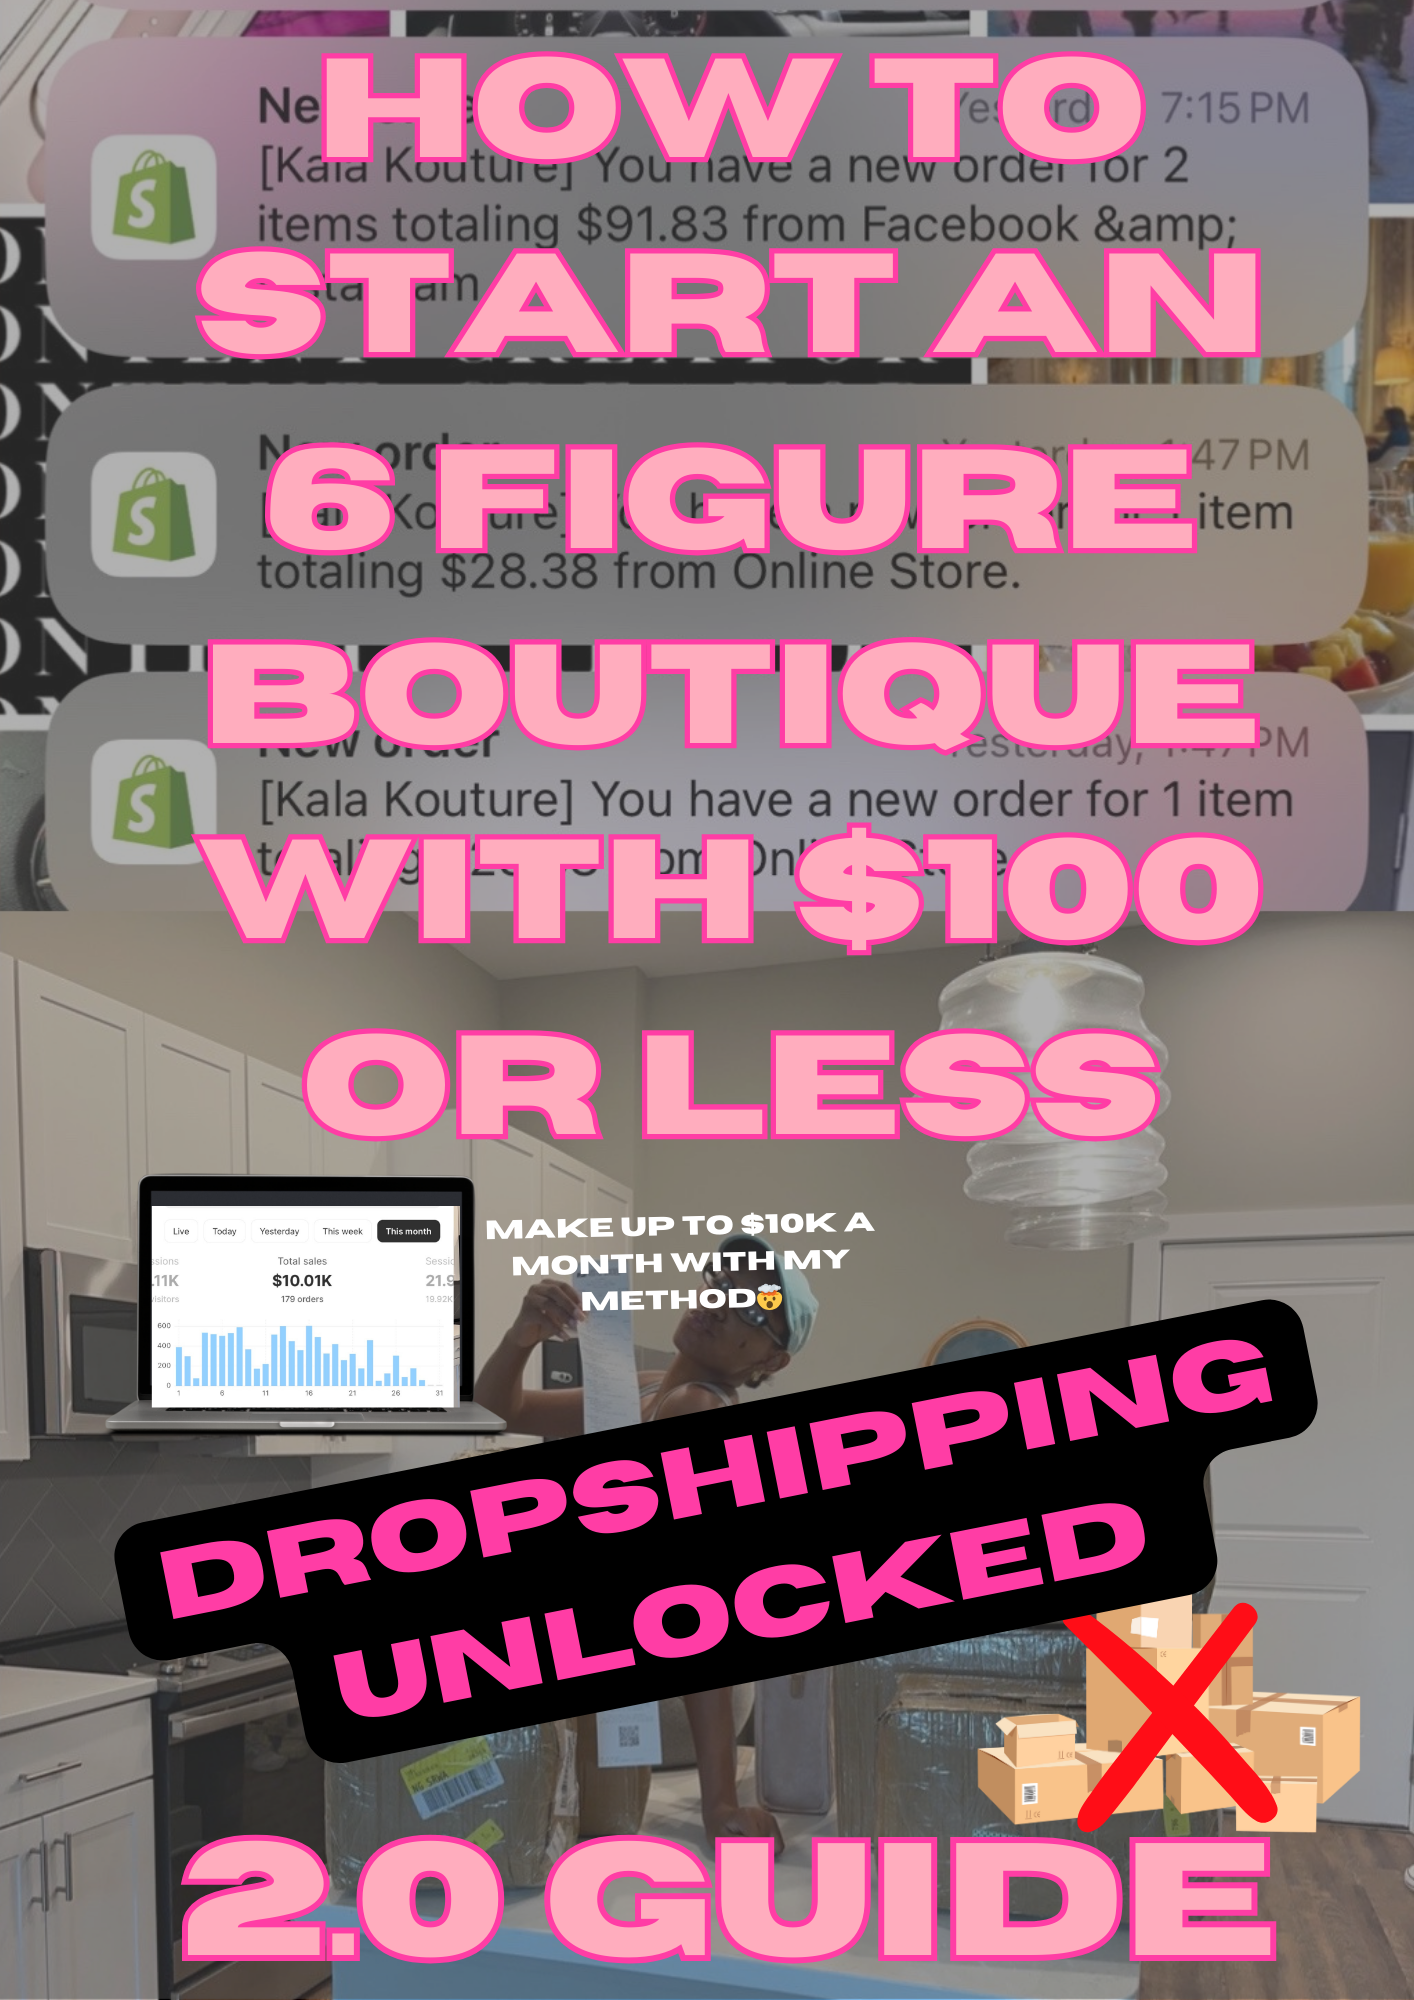 2.0 GUIDE: HOW TO START A 6 FIGURE BOUTIQUE WITH $100 OR LESS: DROPSHIPPING UNLOCKED